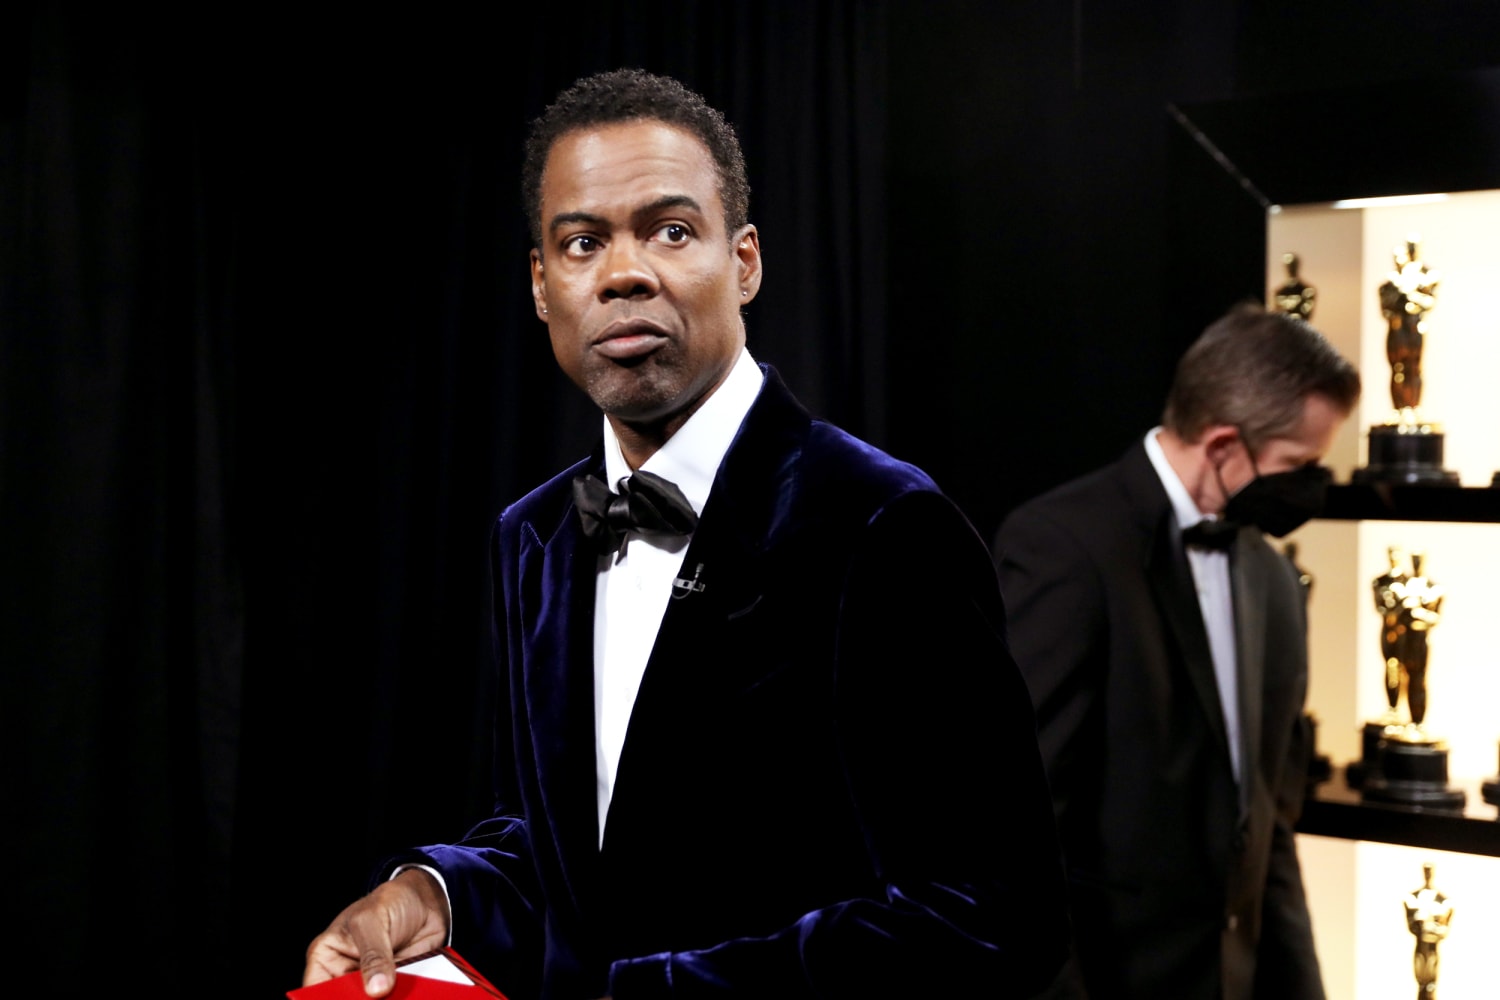 Chris Rock to finally have his say in new Netflix stand-up special